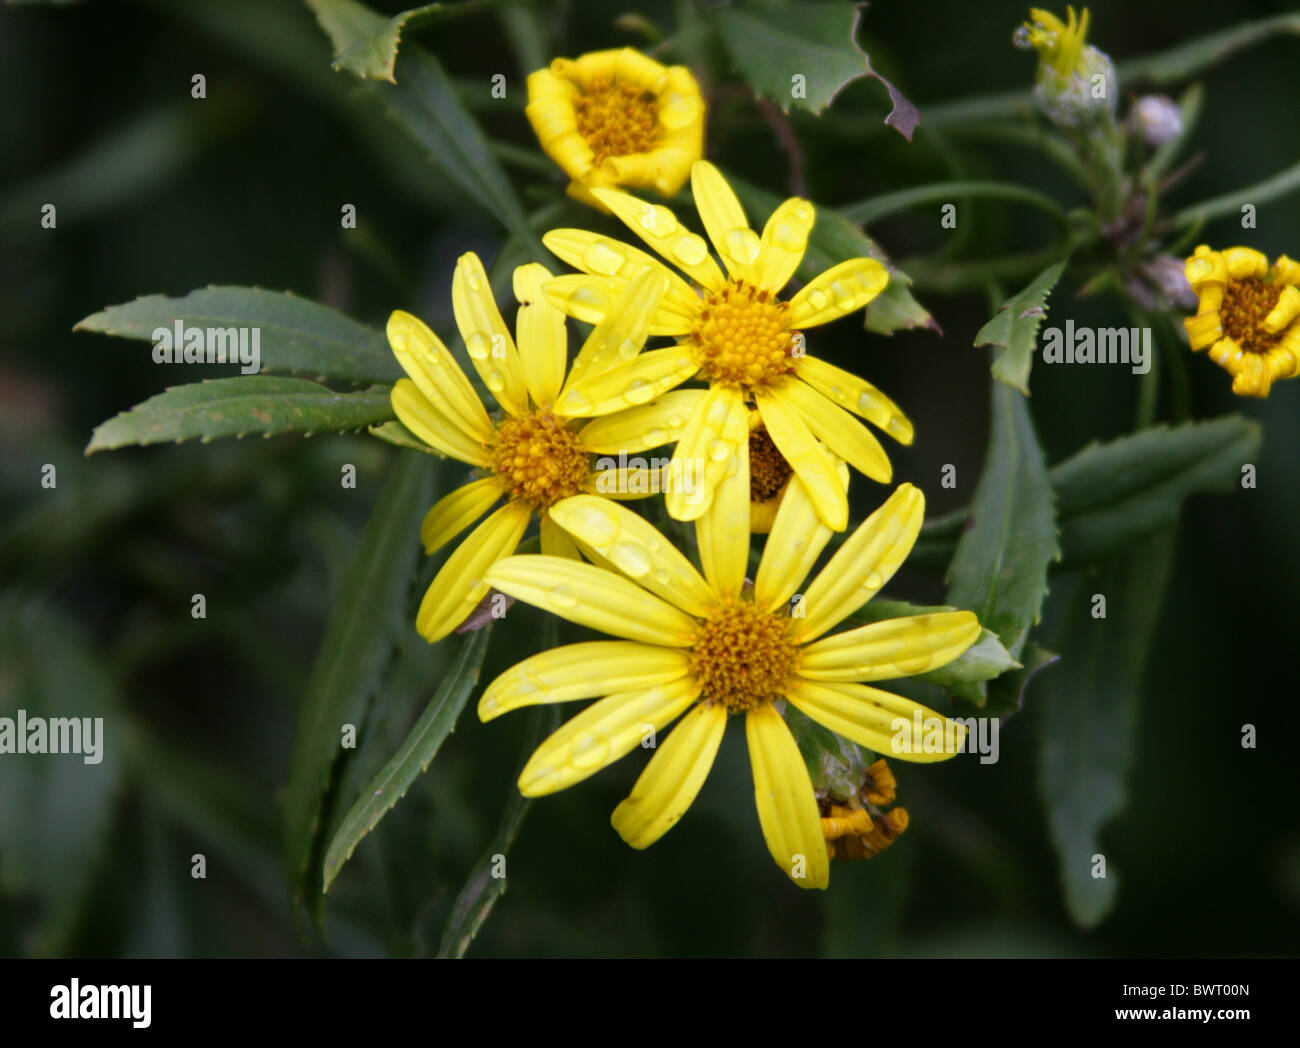 Yellow Composite Daisy Flowers, Asteraceae. Bloukrans River Gorge, Tsitsikamma, South Africa. Stock Photo